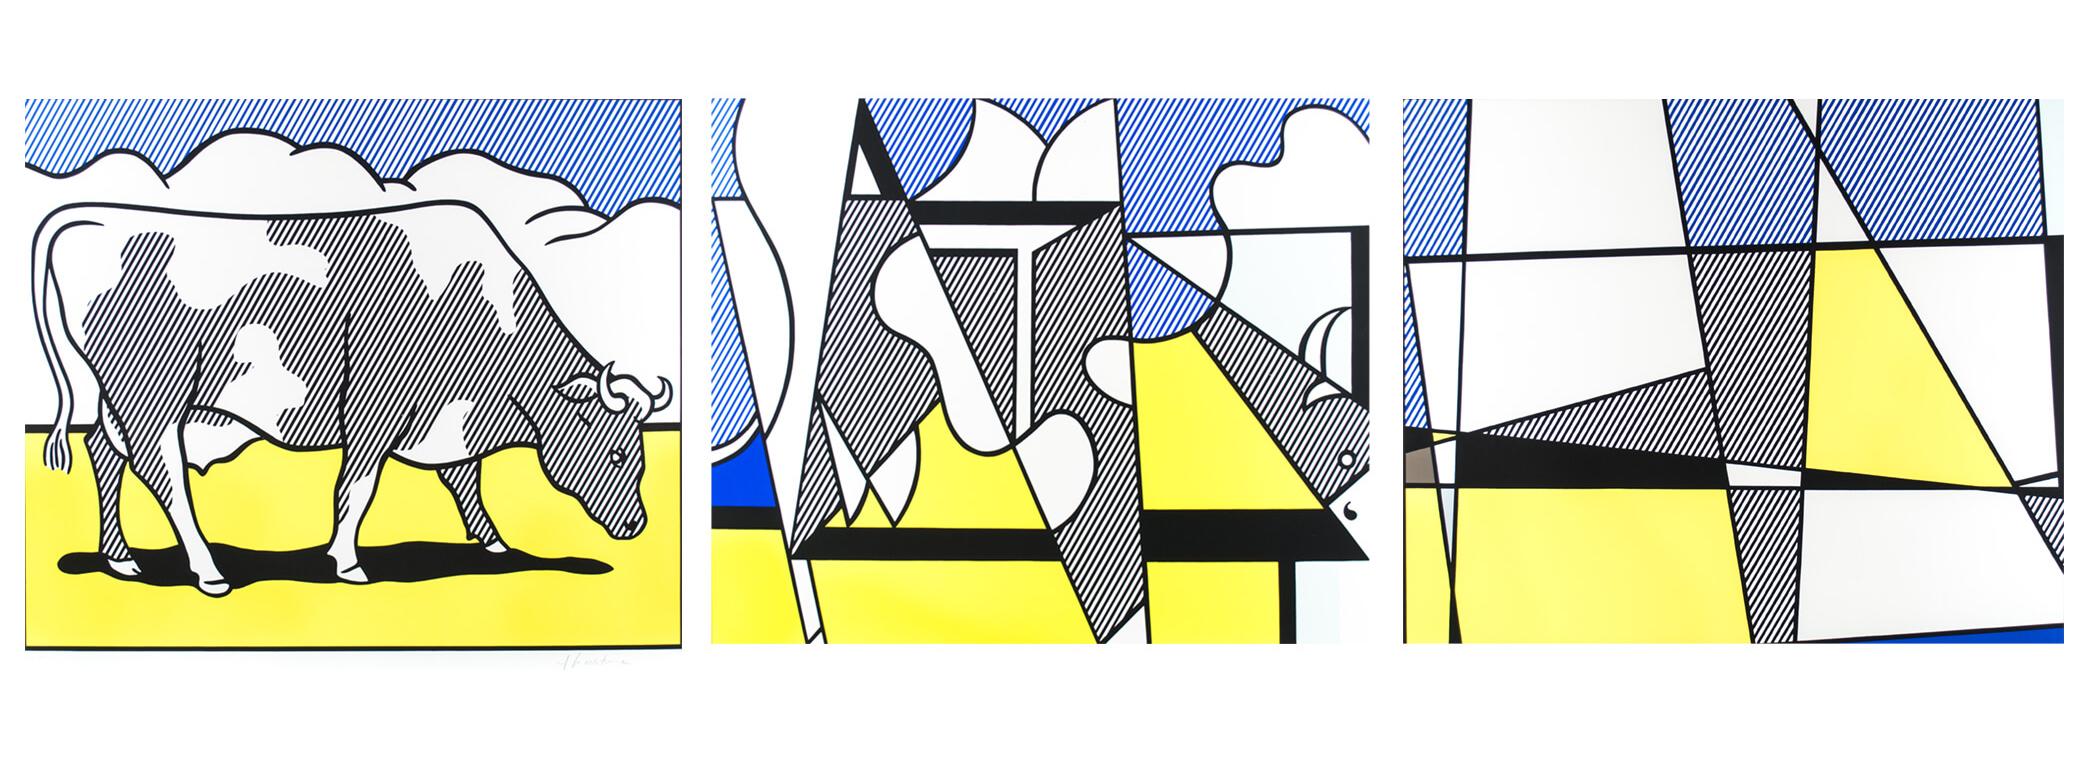 Cow Going Abstract (Triptych)